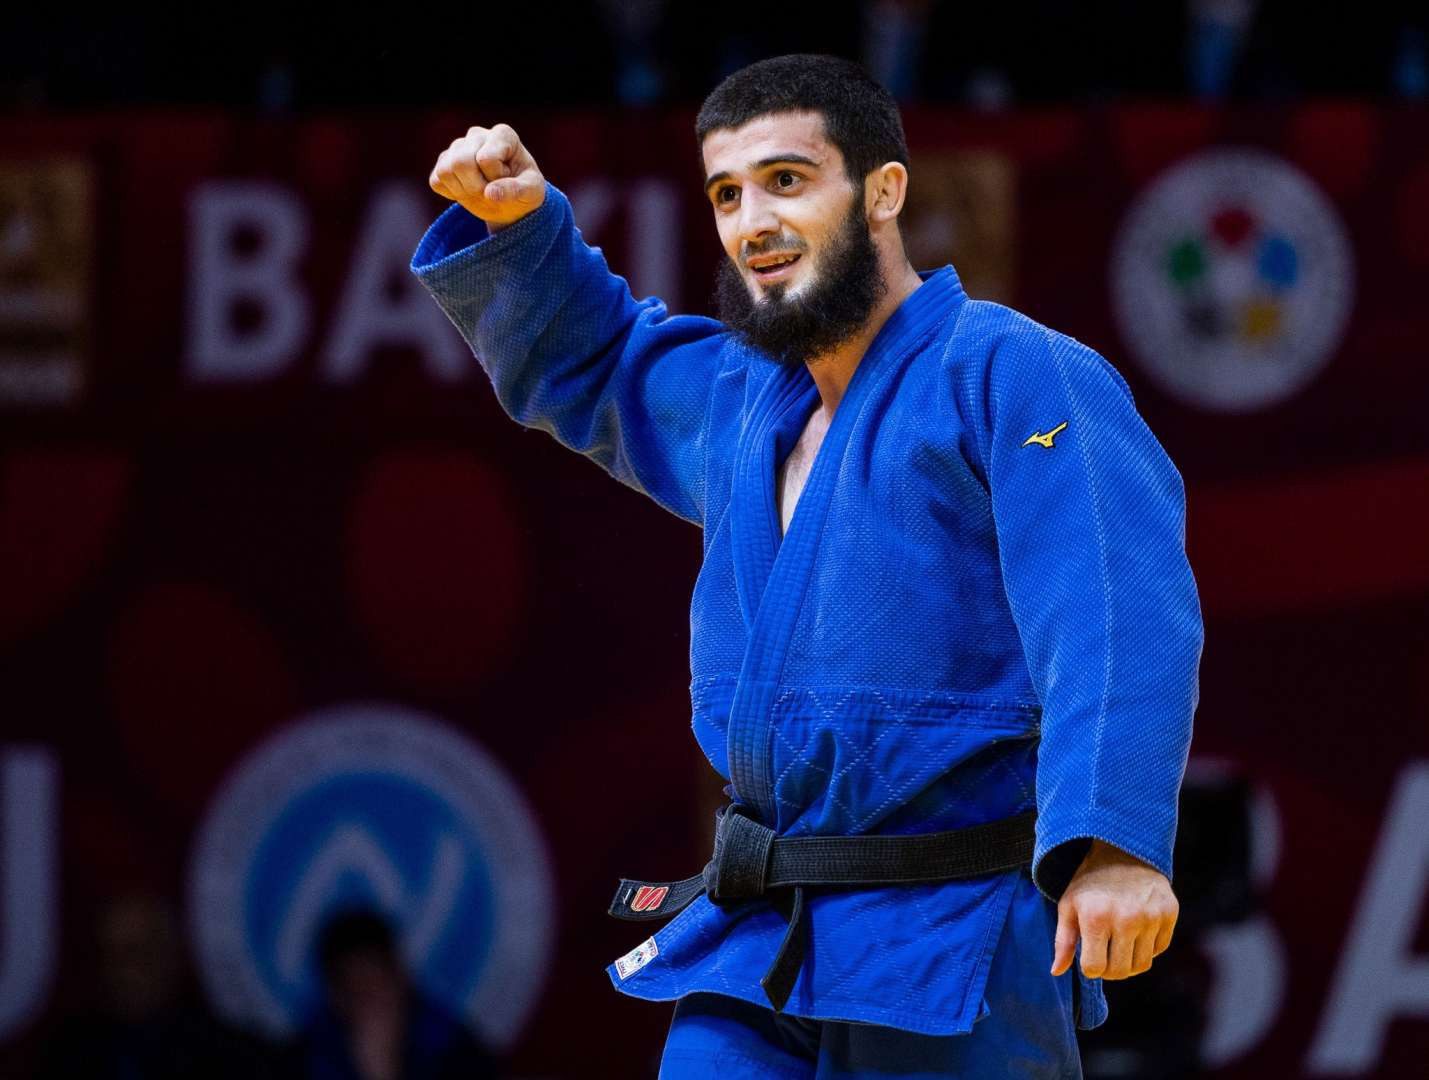 Russian Abdulayev was the best in the -60 kg category. IJF